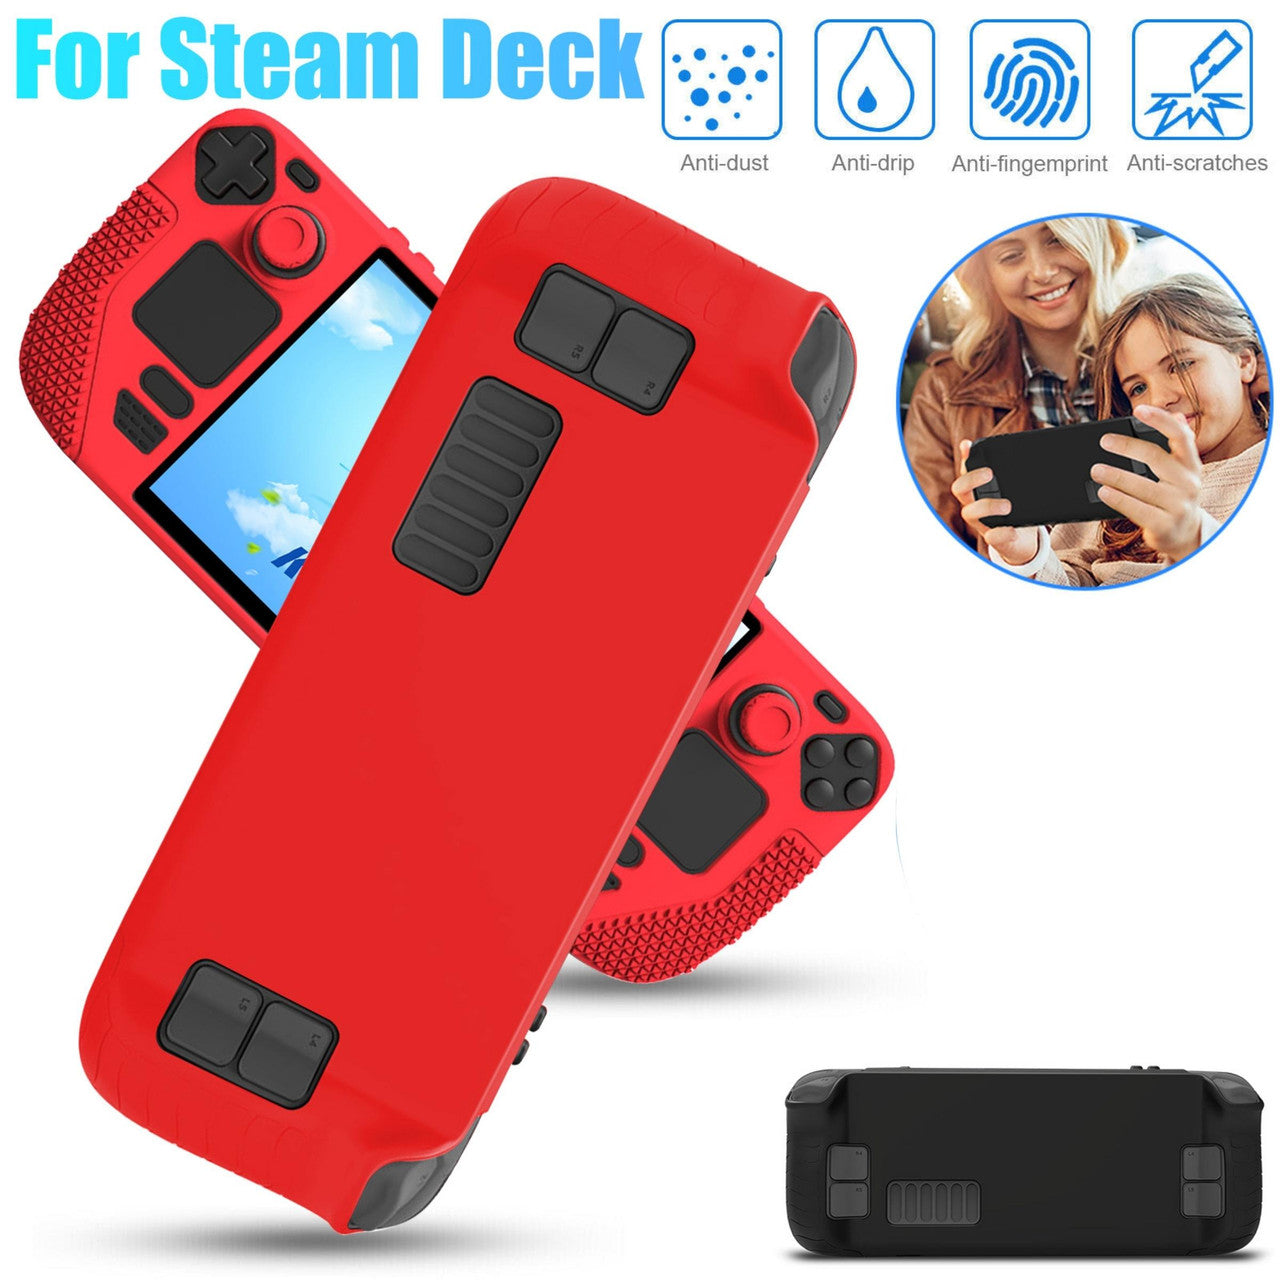 Silicone Dust Plugs Set for Steam Deck Console - Antidust Cover Dustproof Plug for Steam / Switch Ns Oled/Lite Deck Host Protection (Black)